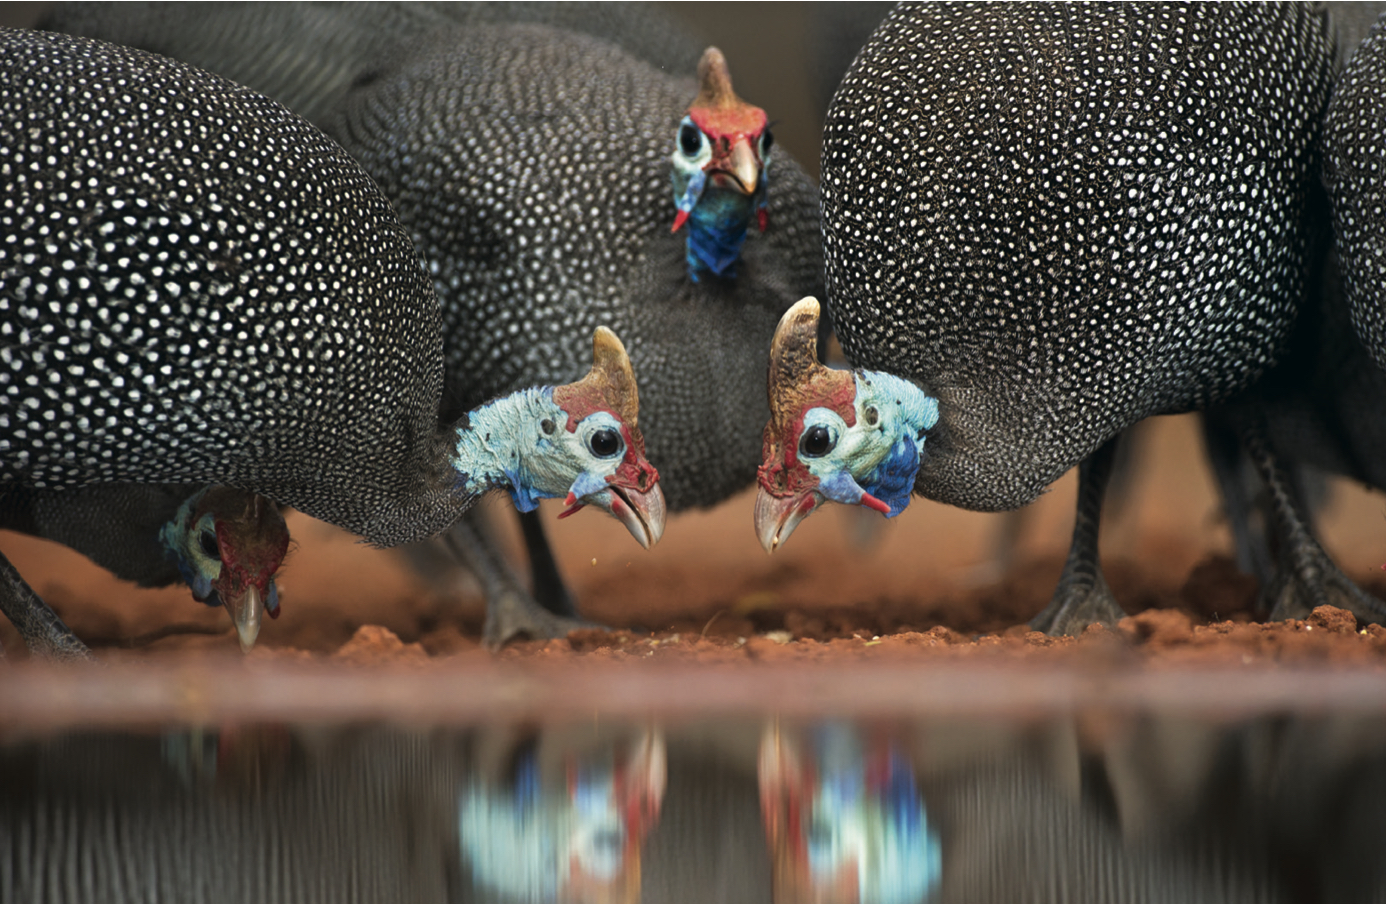 The Seven top facts about Guinea Fowl (discovered by a new owner